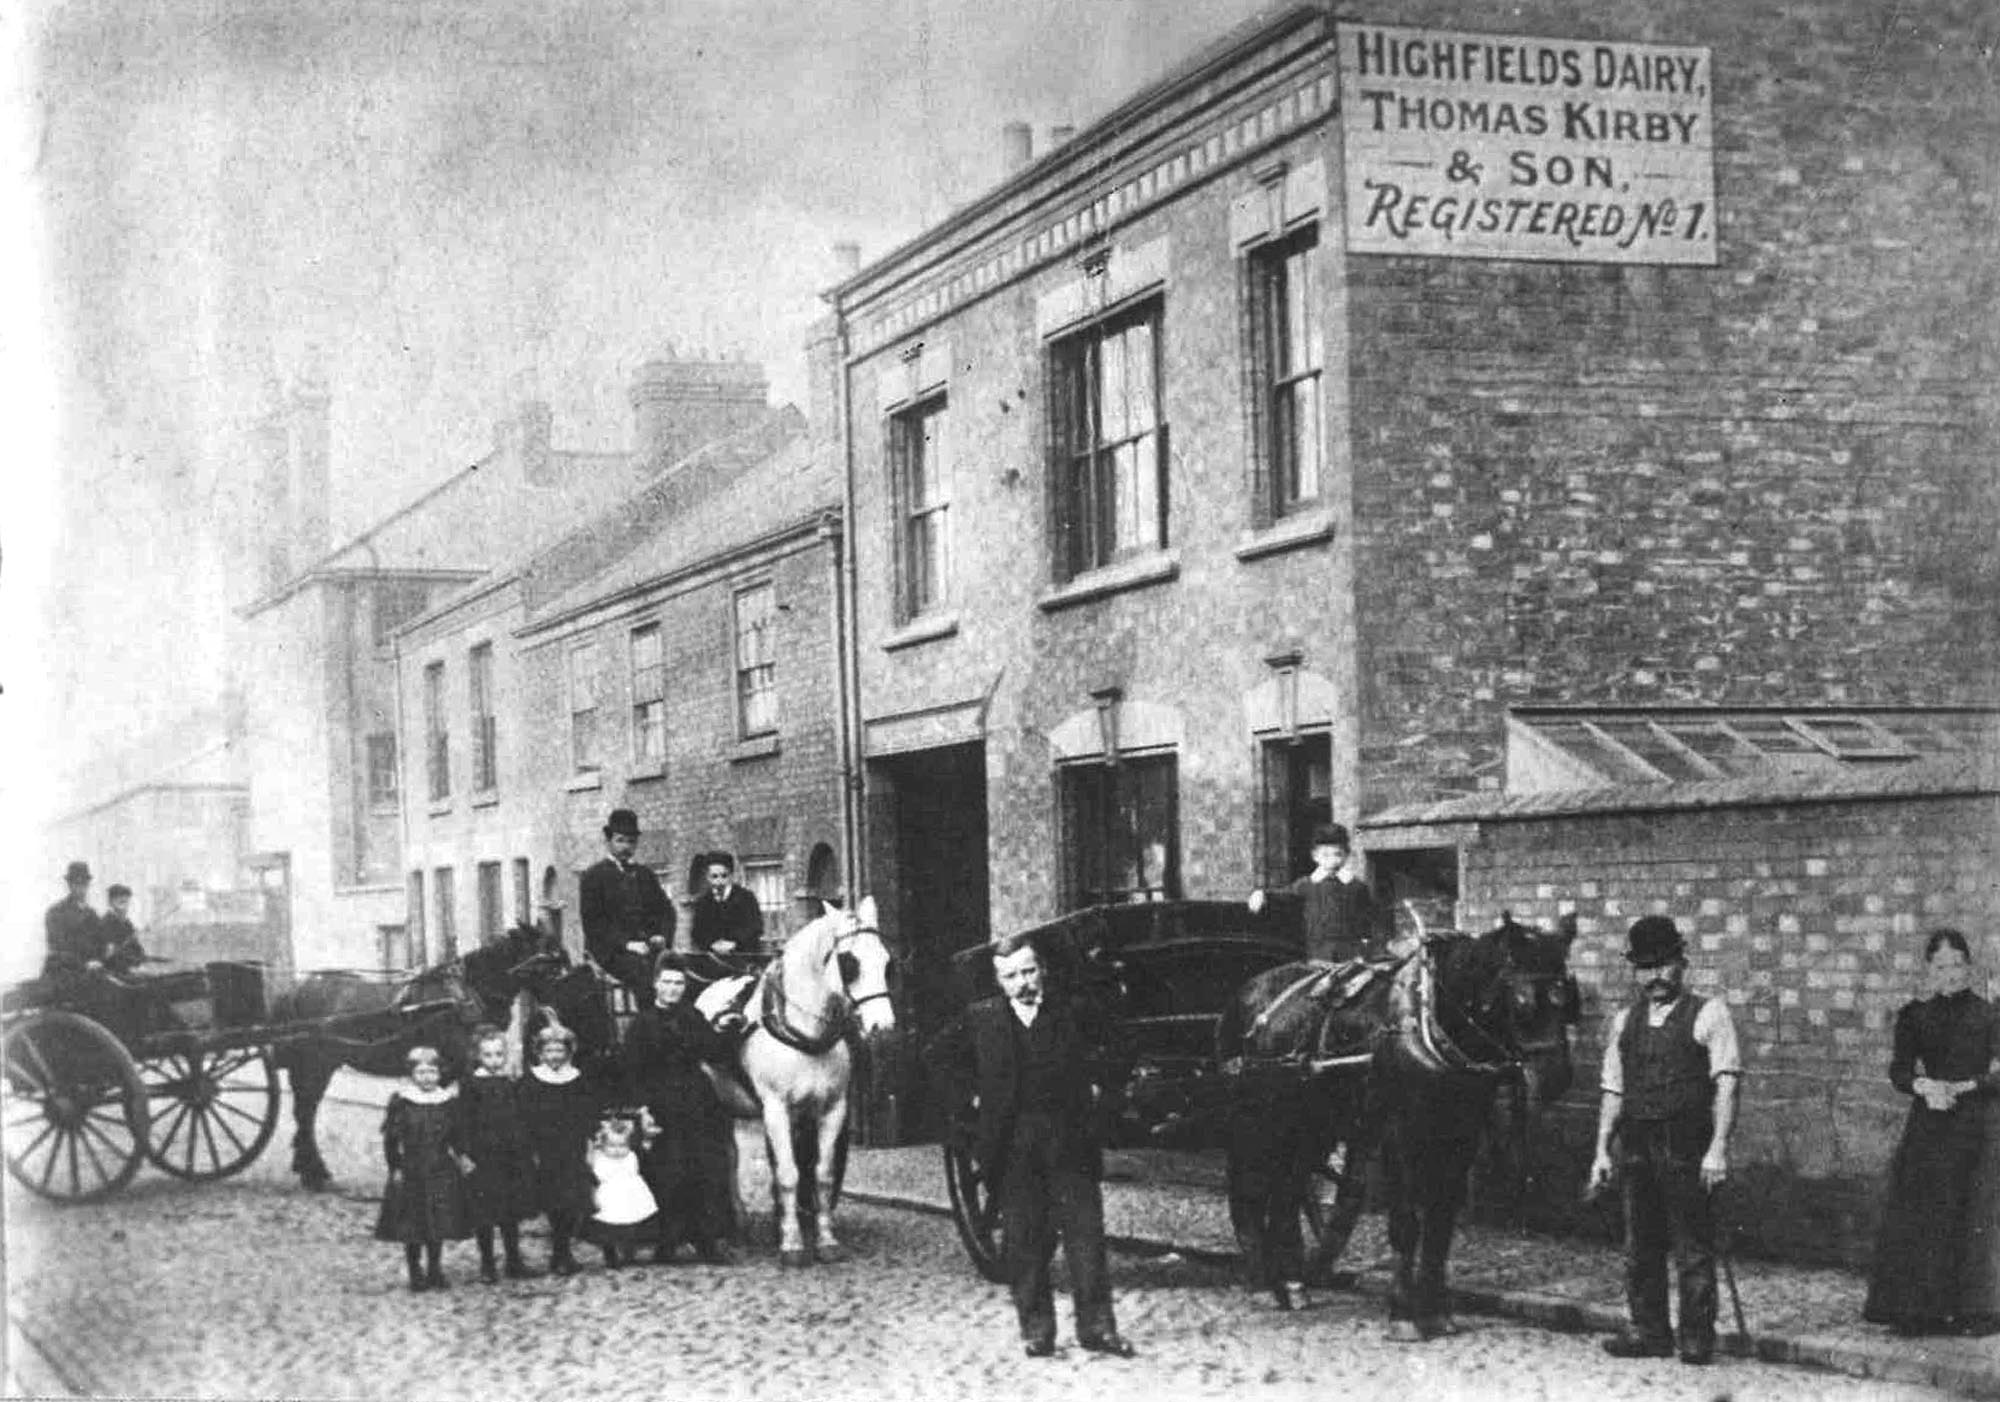 James Kirby outside the Highfields Dairy - Record Office for Leicestershire, Leicester and Rutland